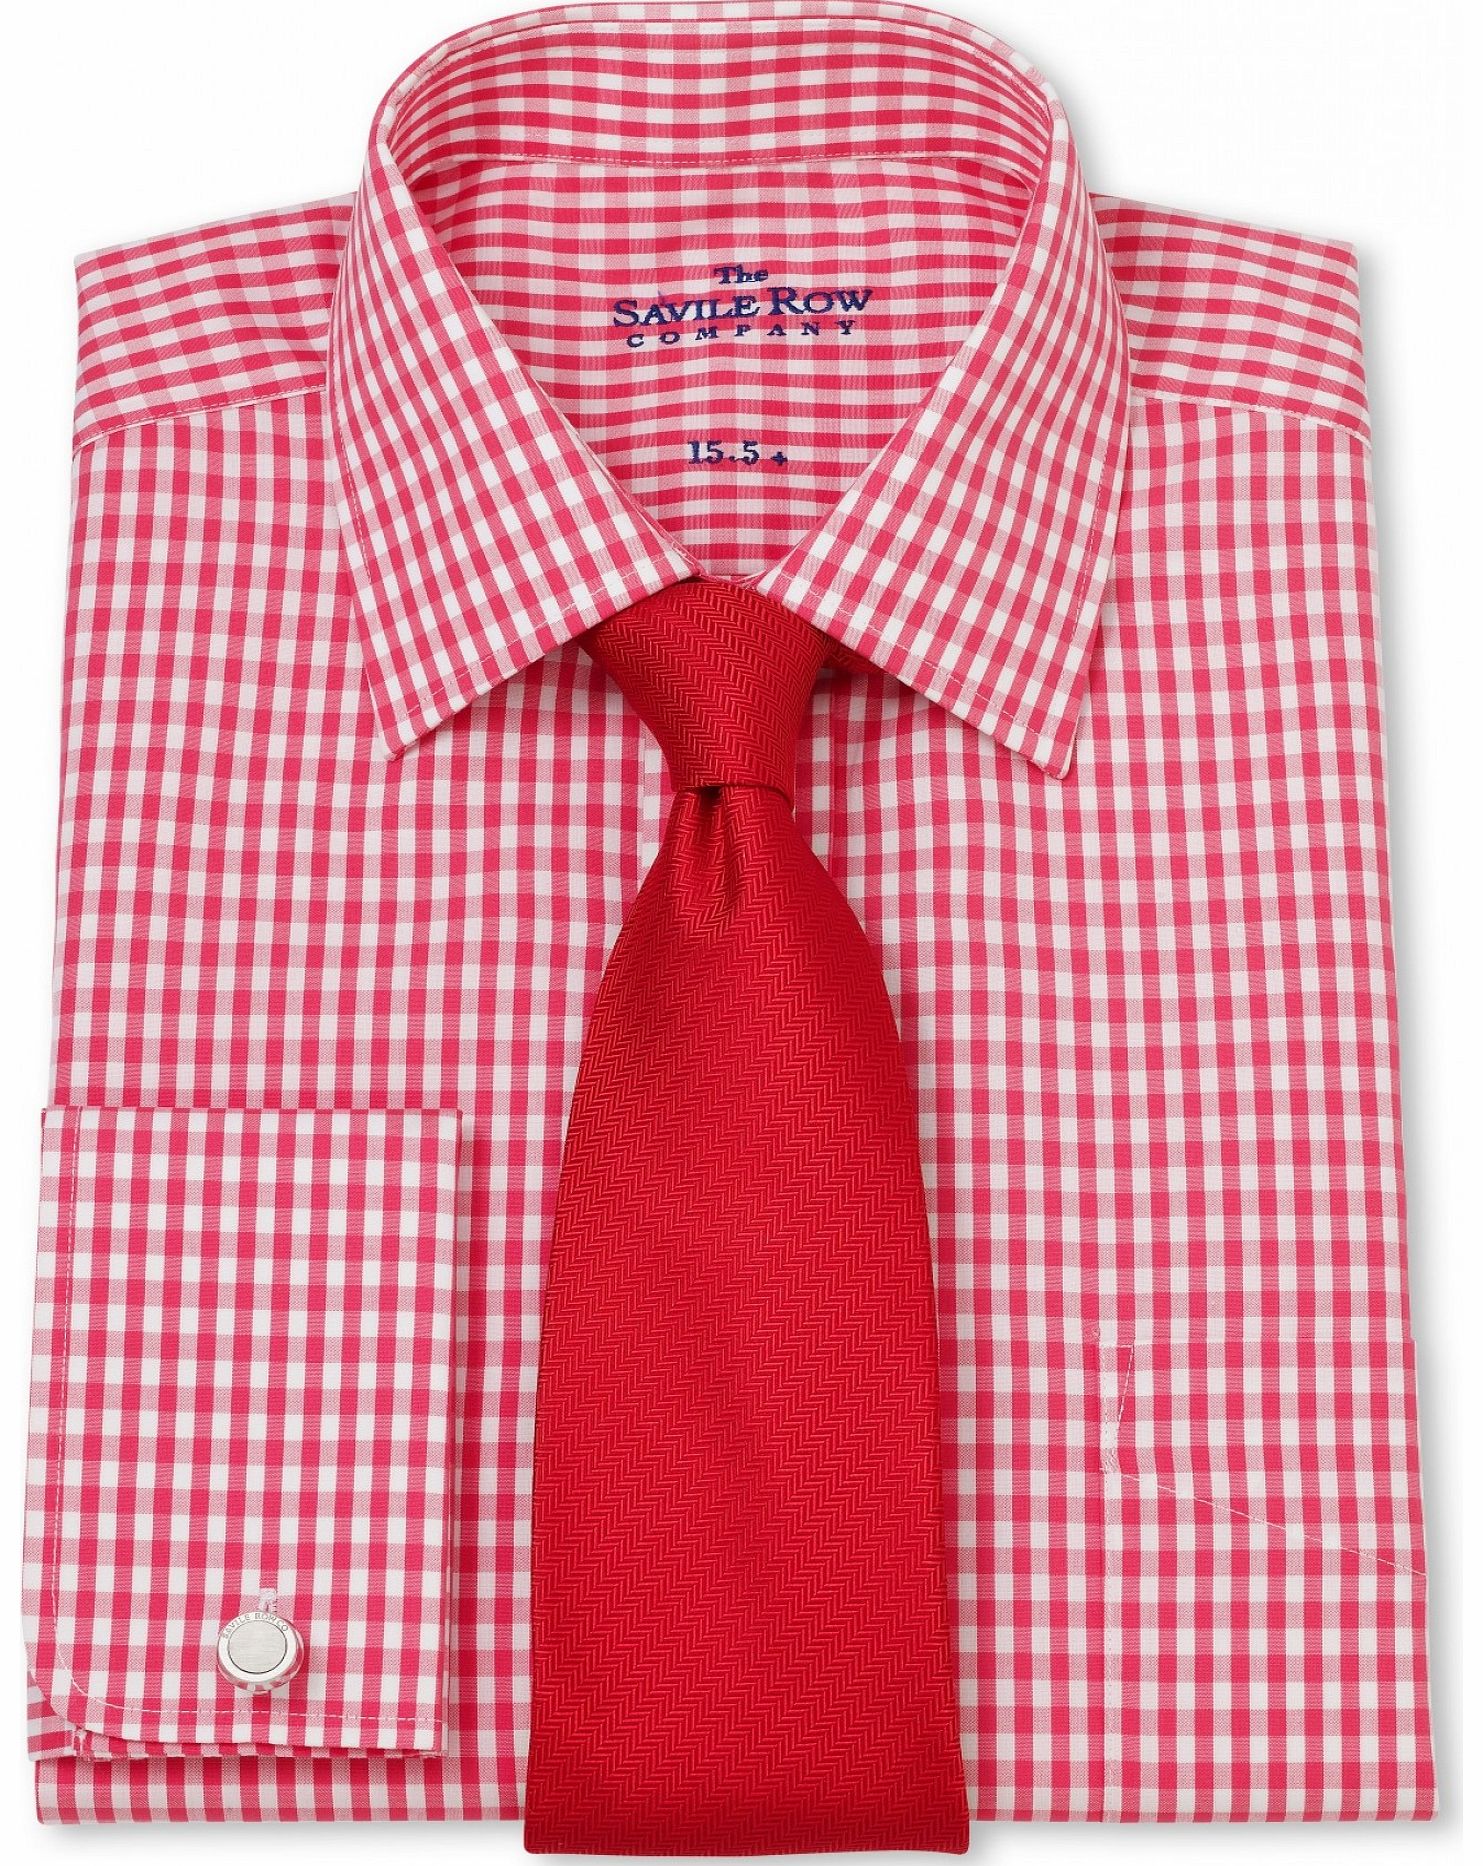 Savile Row Company Pink White Gingham Check Classic Fit Shirt 15